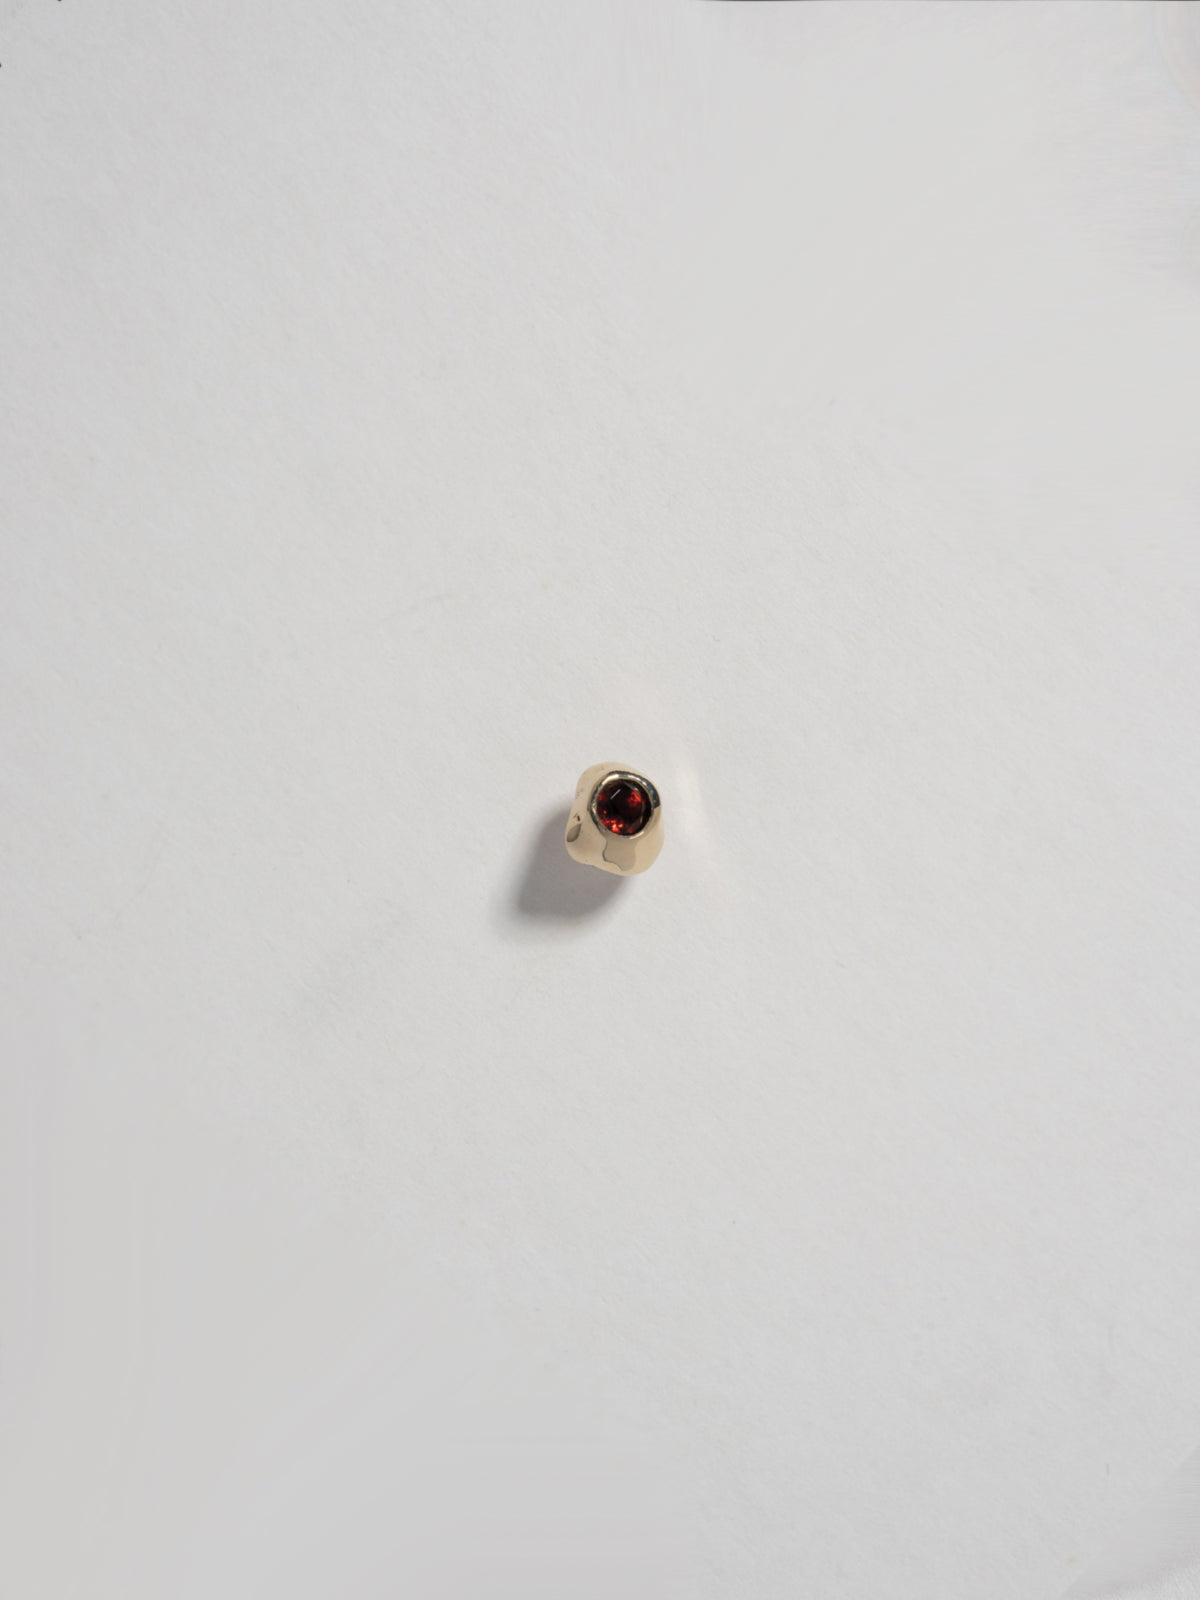 Close up product image of FARIS KIRA Stud in 14k gold with garnet, shown on white background (front view)